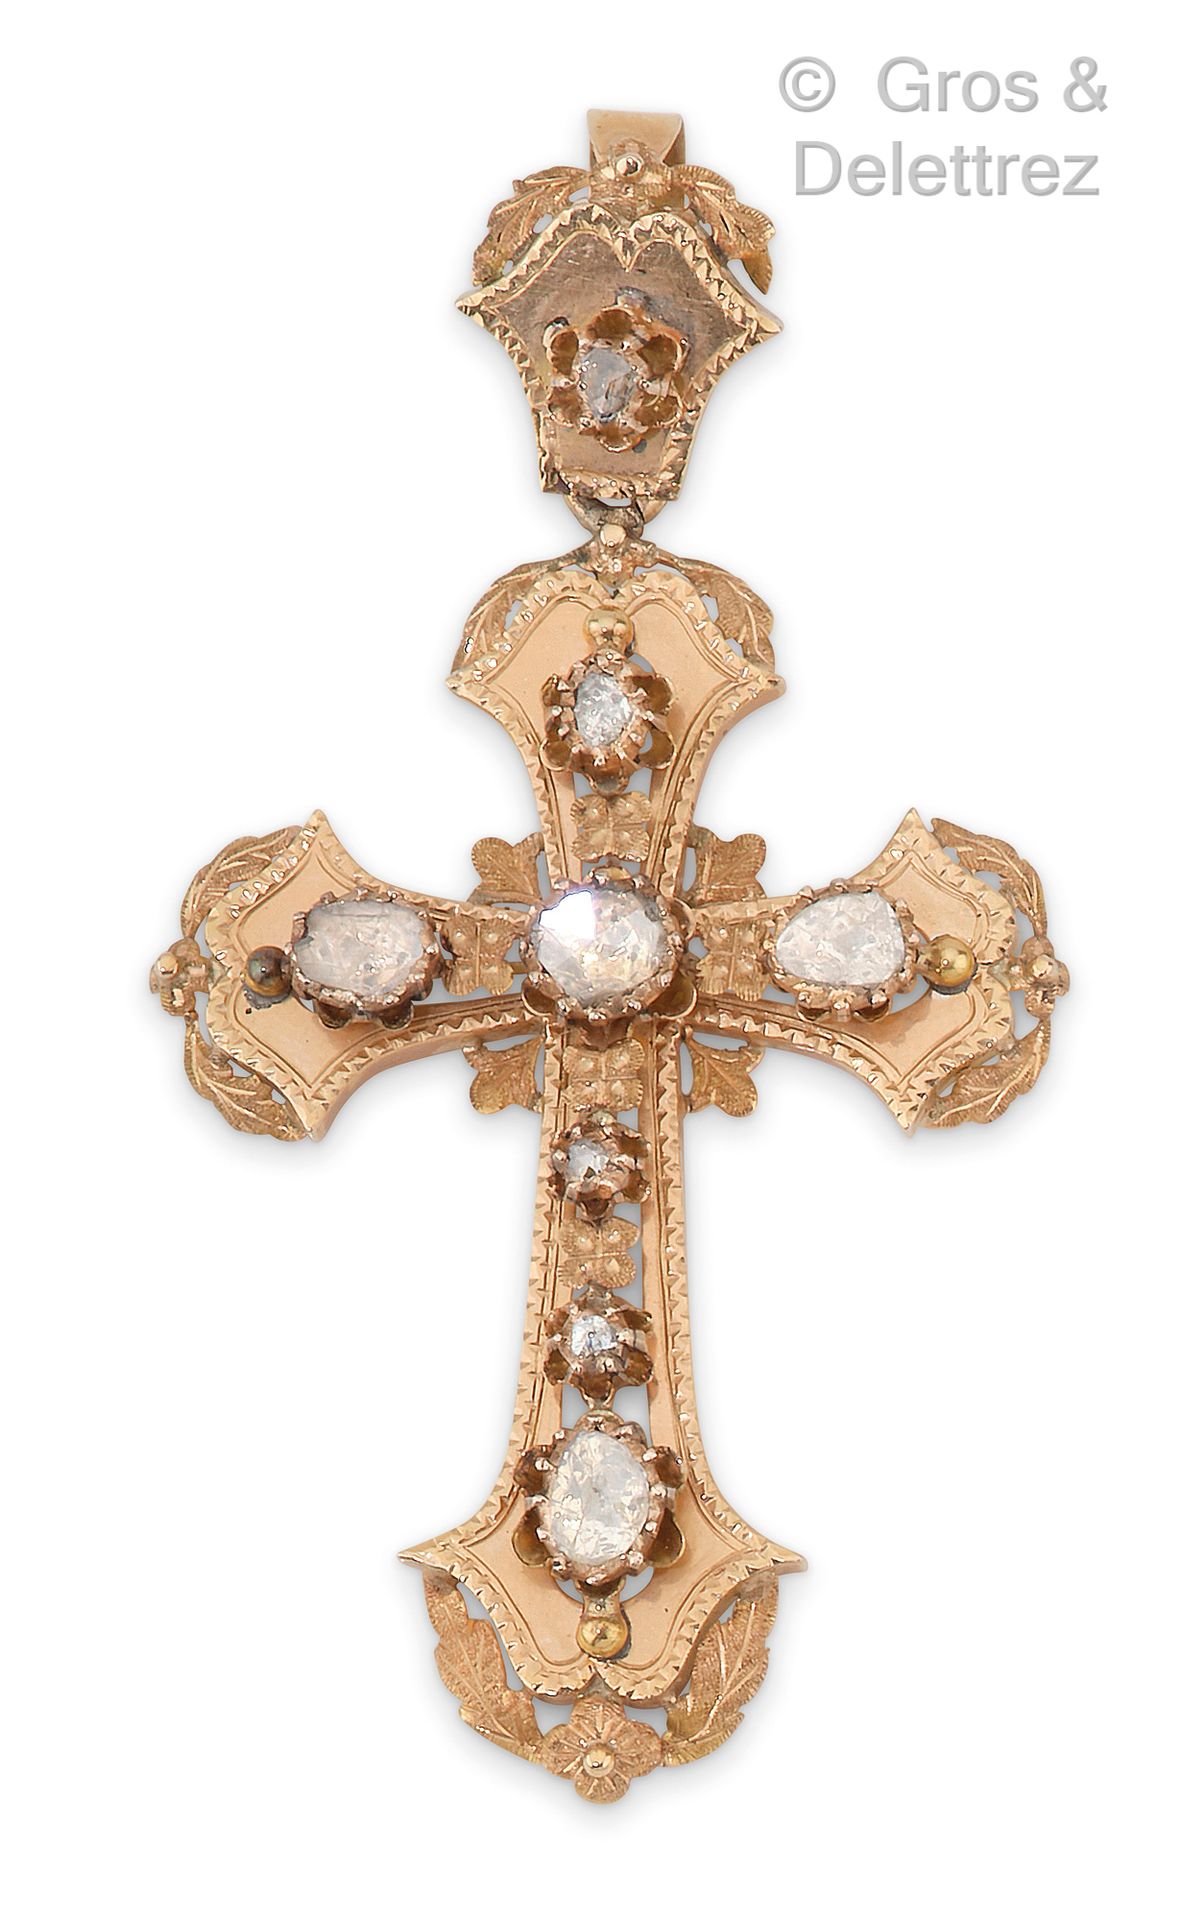 Null Pendant "Arlesian Cross" in pink gold, decorated with rose-cut diamonds and&hellip;